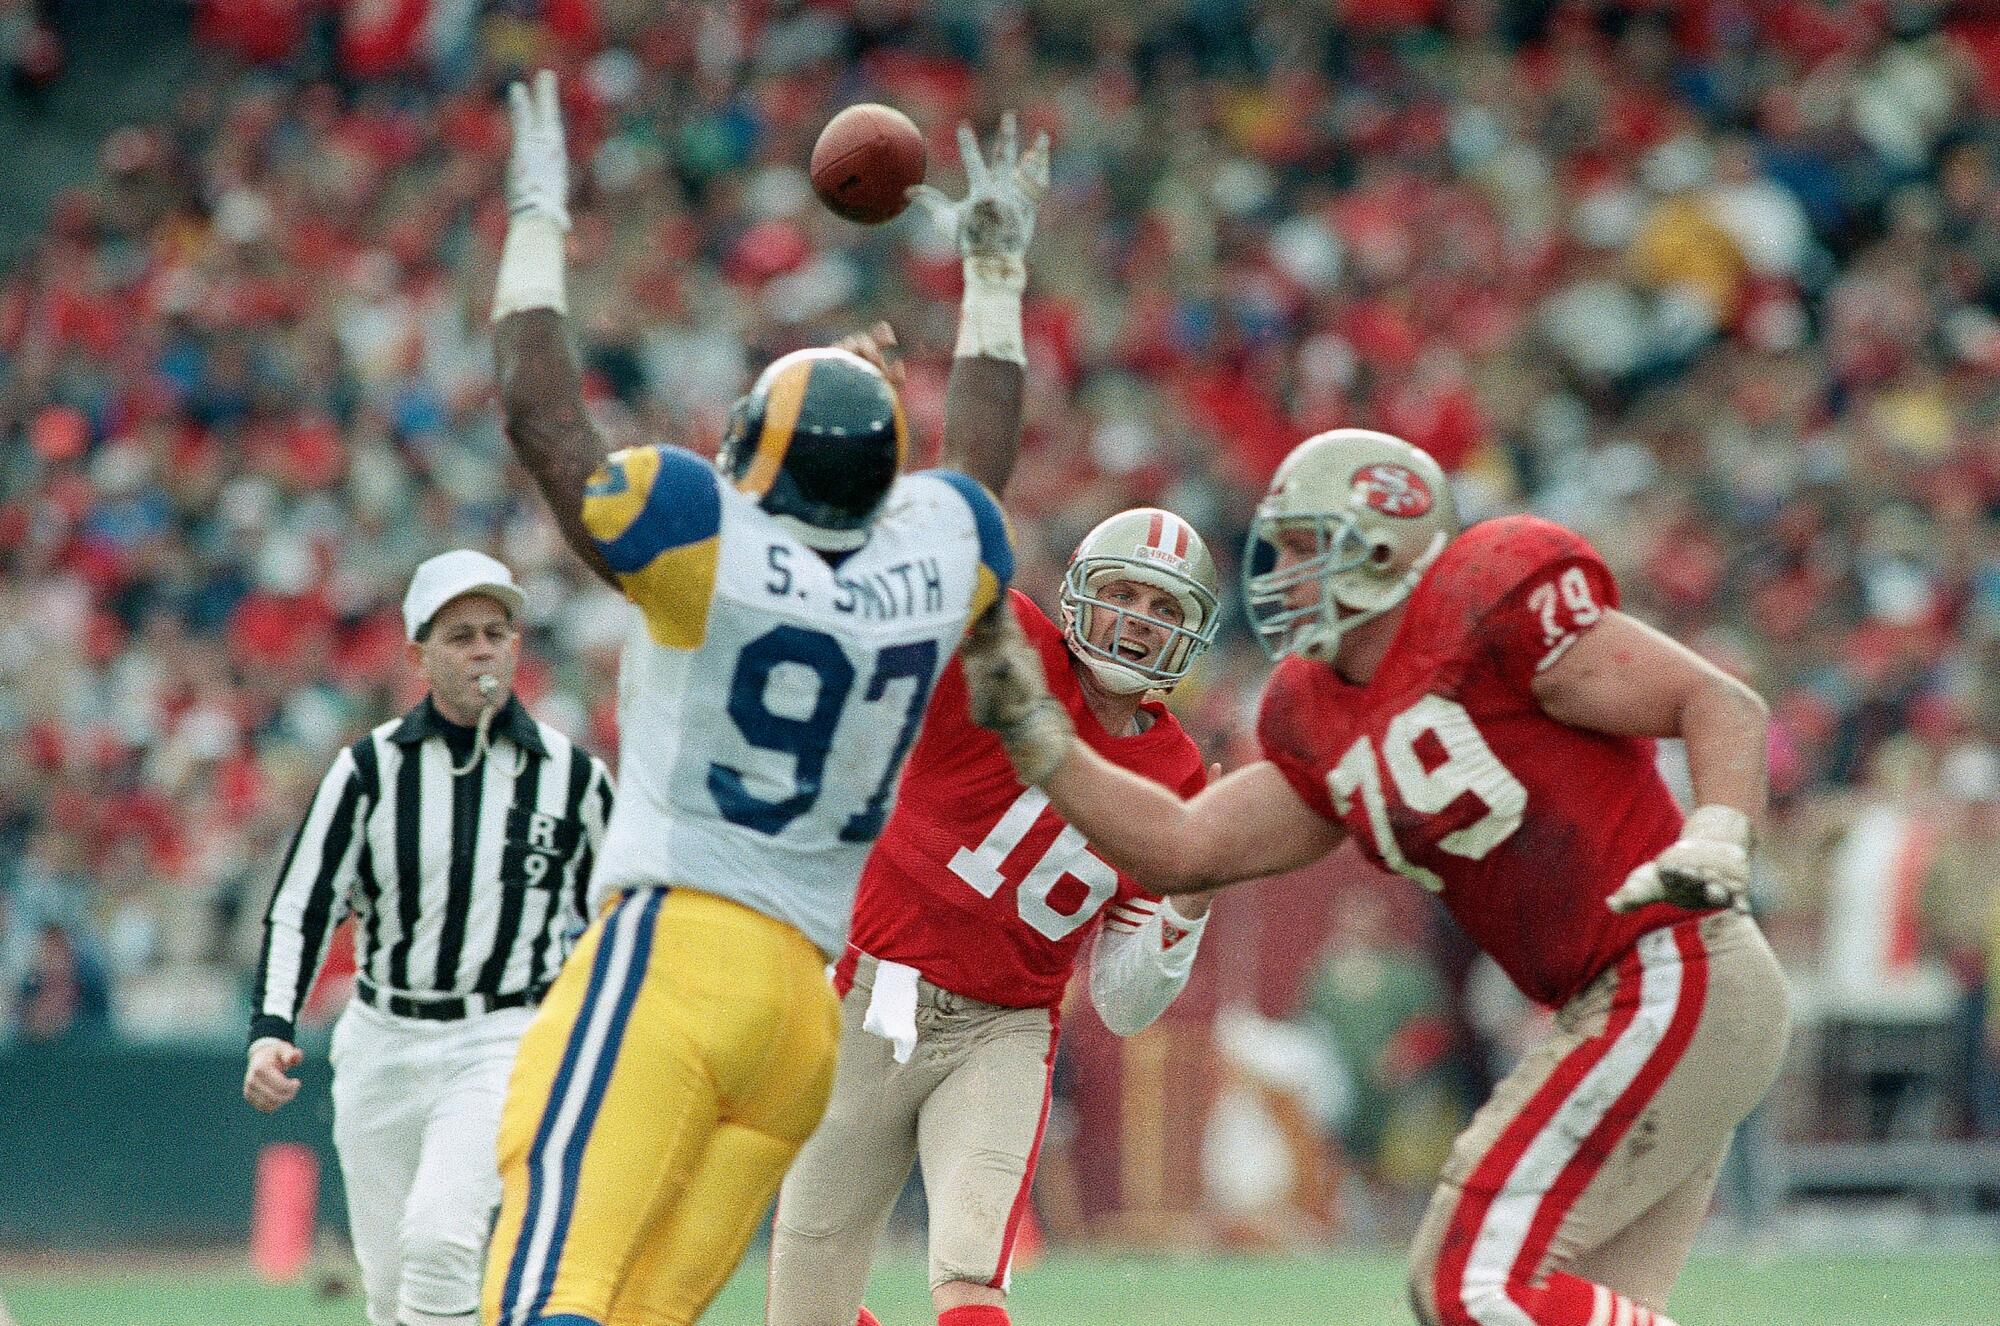 49ers quarterback Joe Montana throws a pass to Brent Jones for a touchdown over the head of Rams Sean Smith.